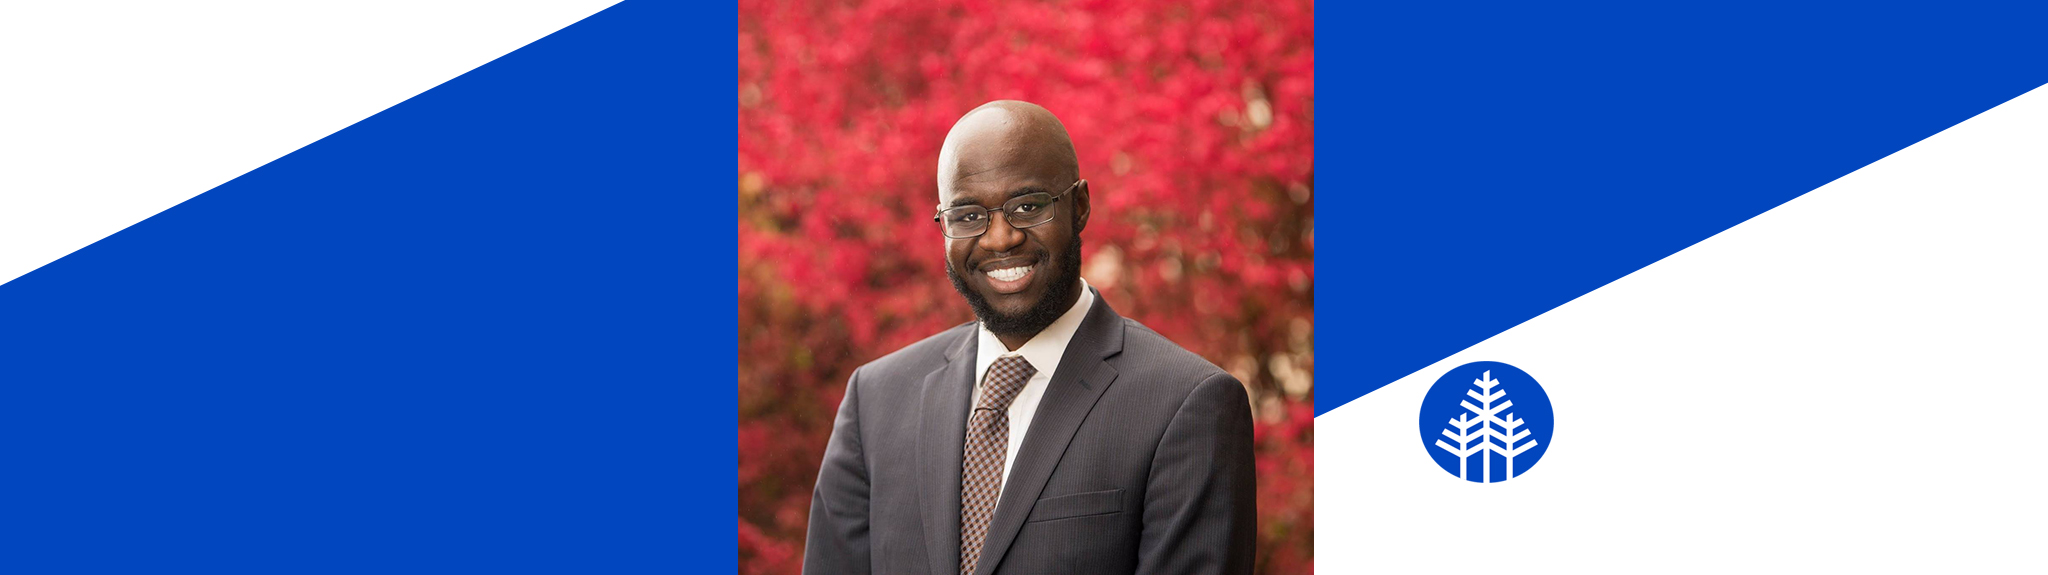 Mouhamadou Diagne, chief diversity officer